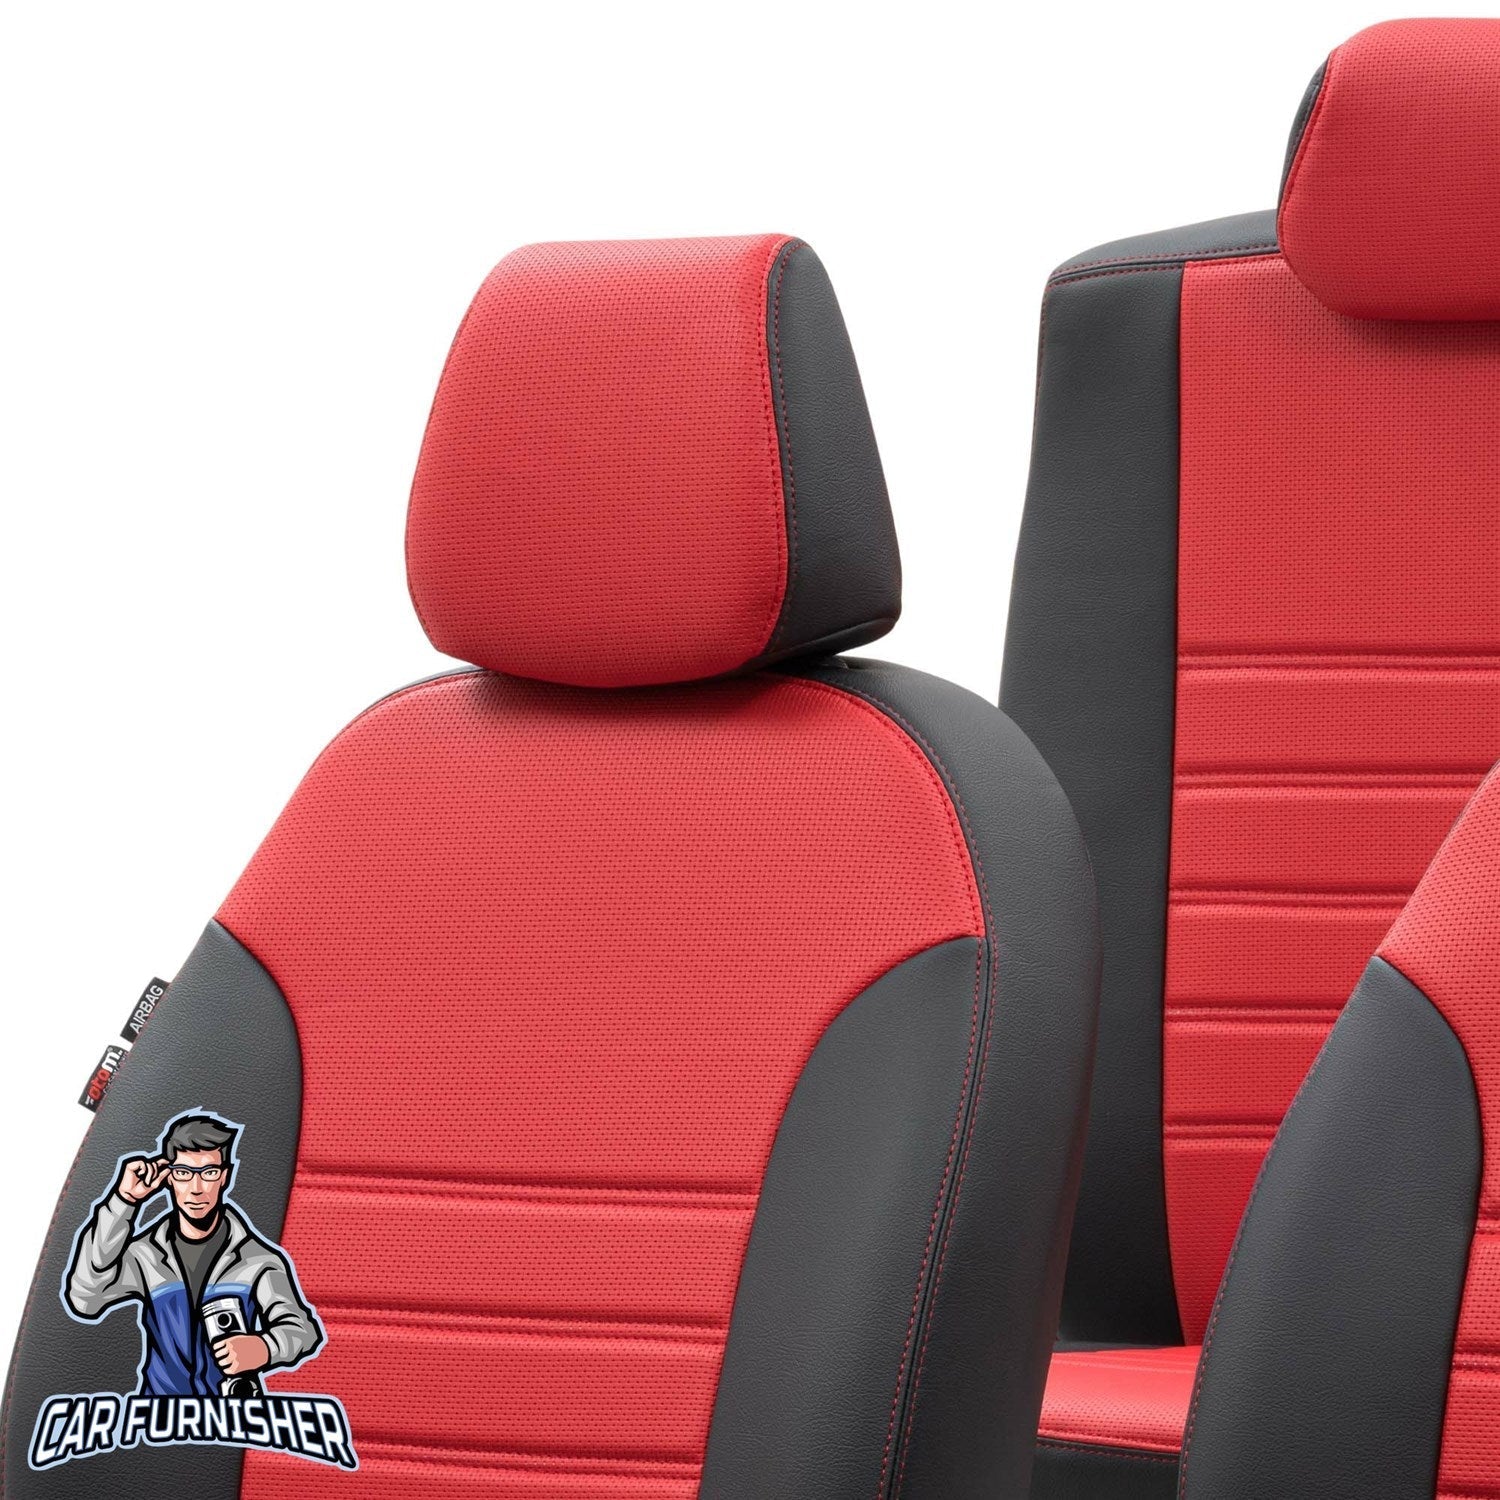 Proton Gen-2 Seat Covers New York Leather Design Red Leather